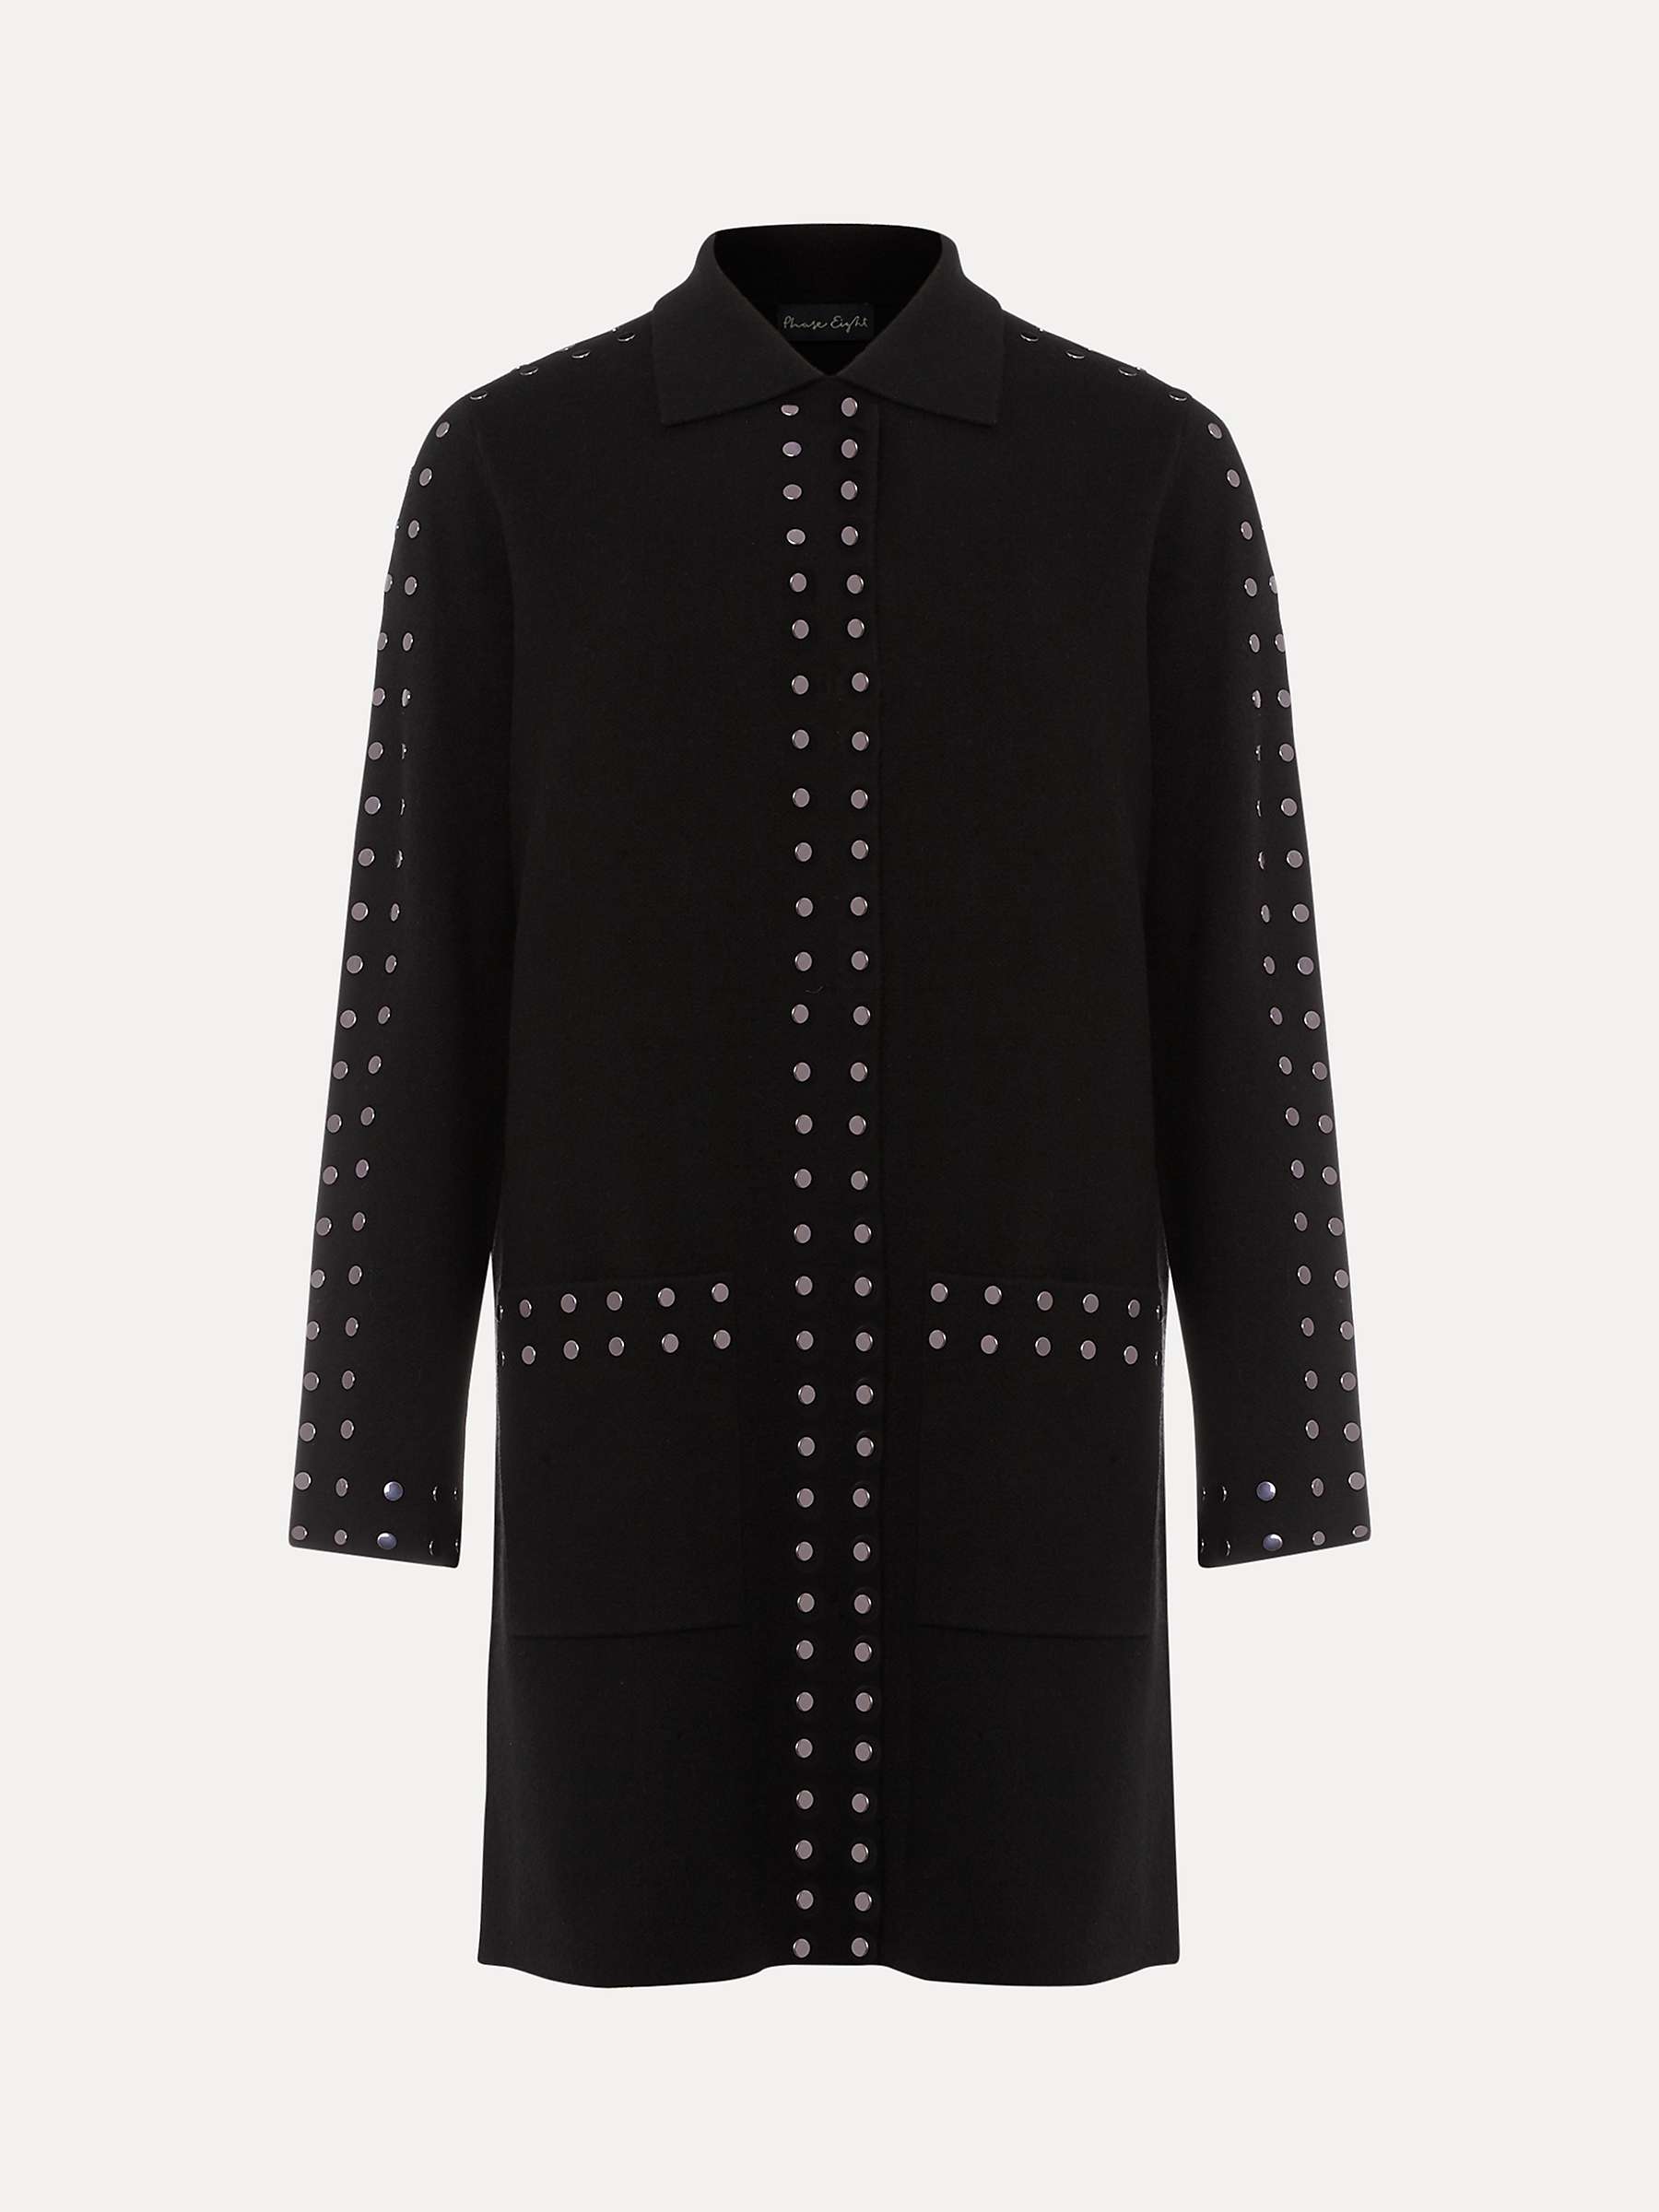 Buy Phase Eight Cassidy Studded Wool Blend Shacket, Black Online at johnlewis.com